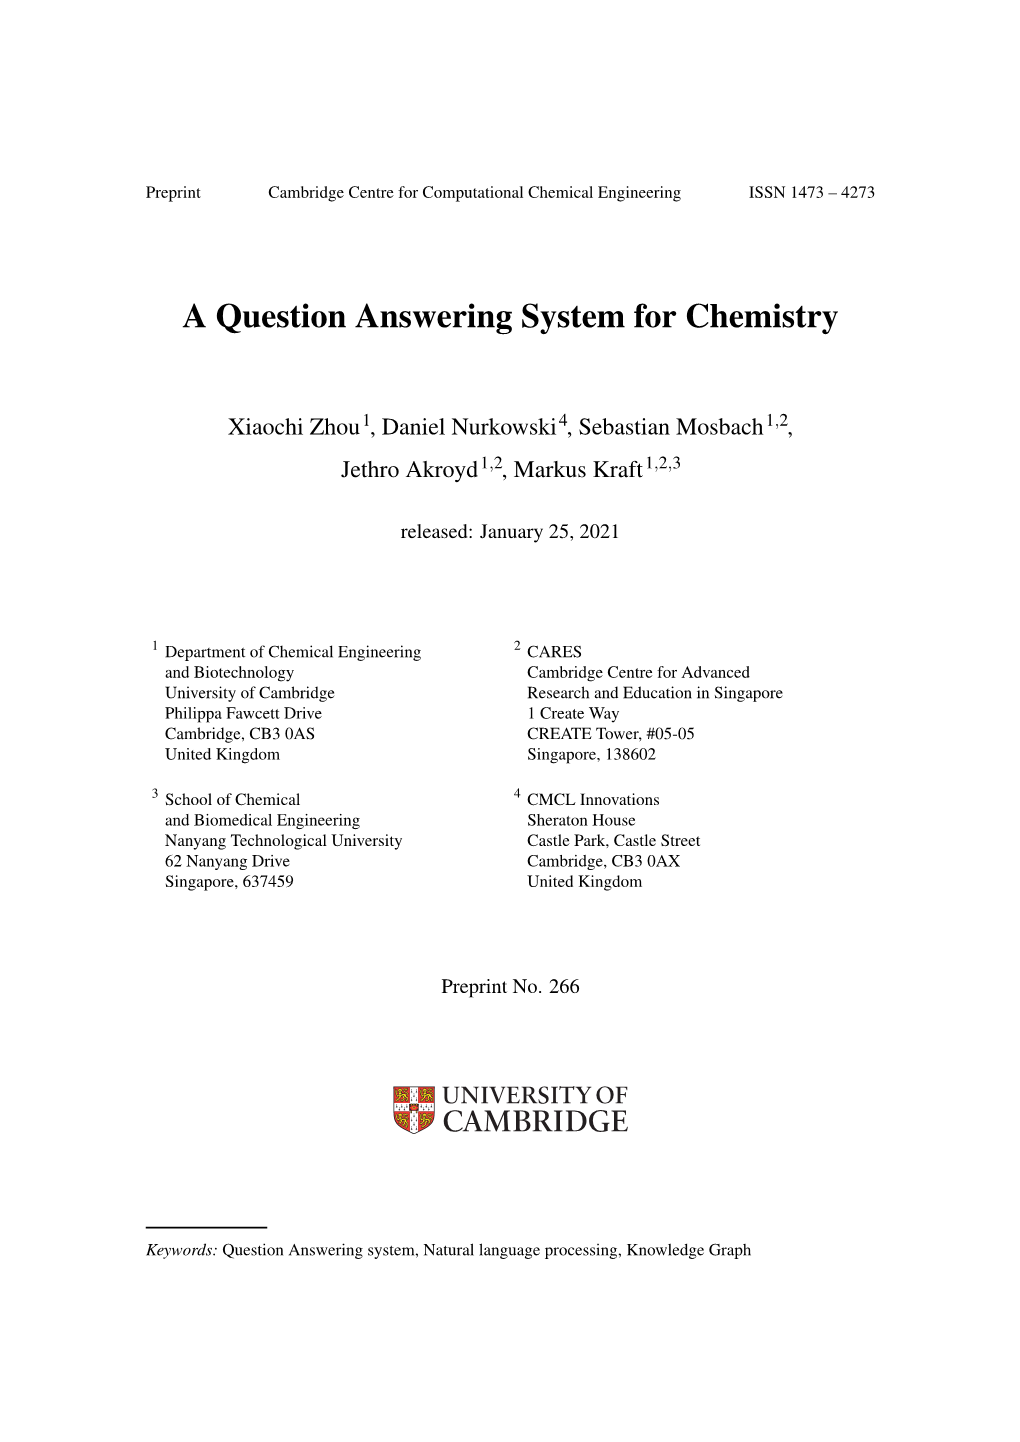 A Question Answering System for Chemistry